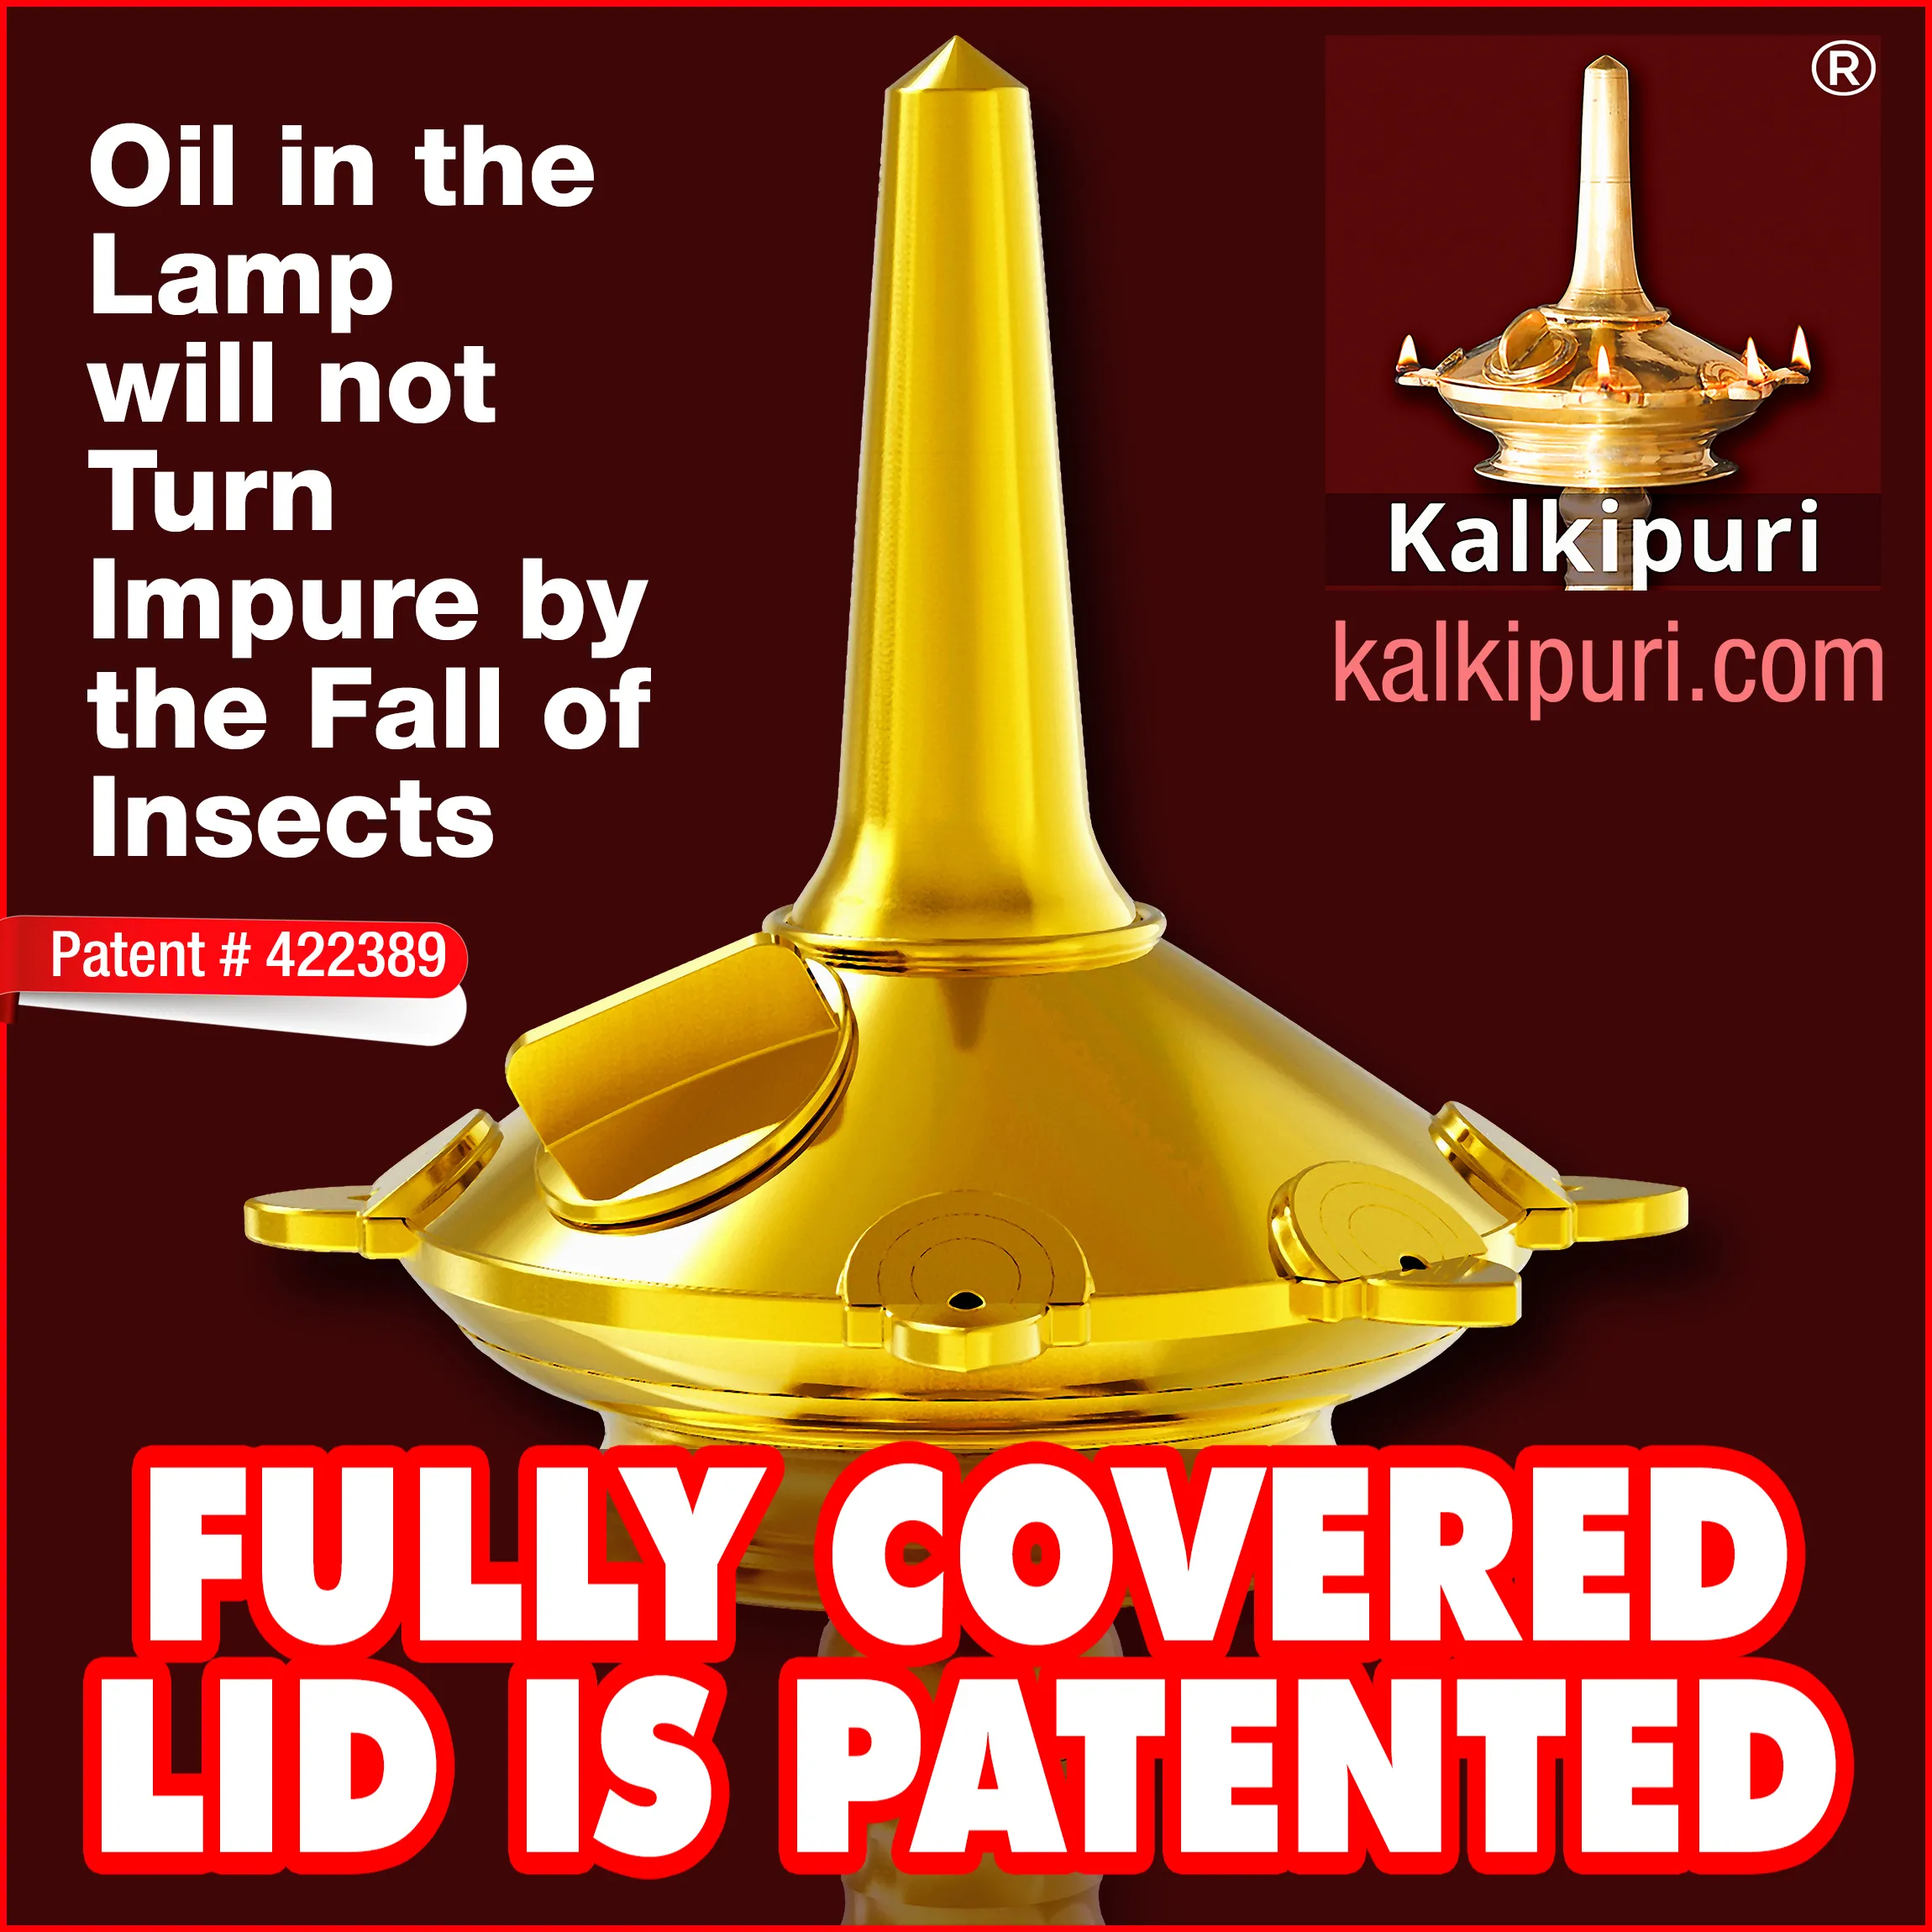 Kalki got patent for fully covered lid to prevent the fall of insect into oil. Patented Kalkipuri insect free oil lamps.